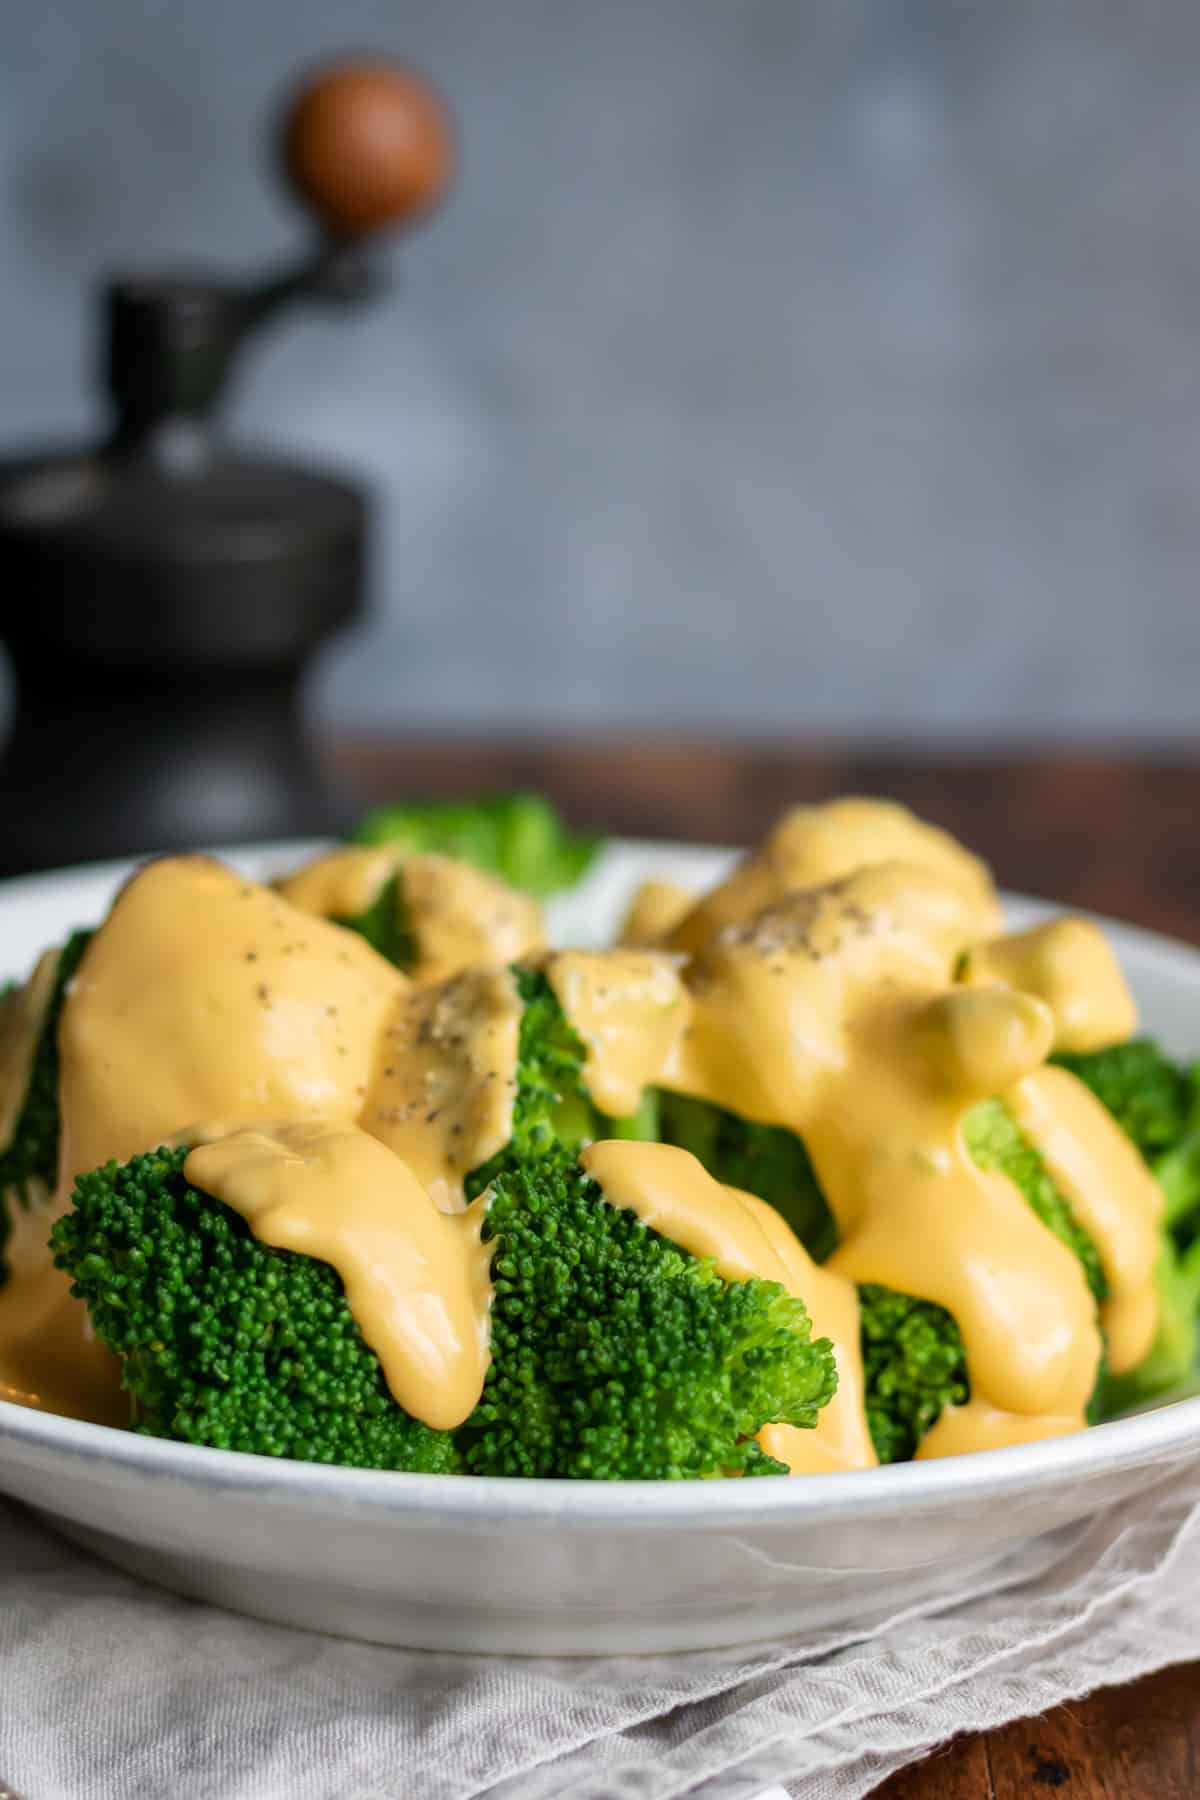 Table with a serving dish of broccoli with cheese sauce.